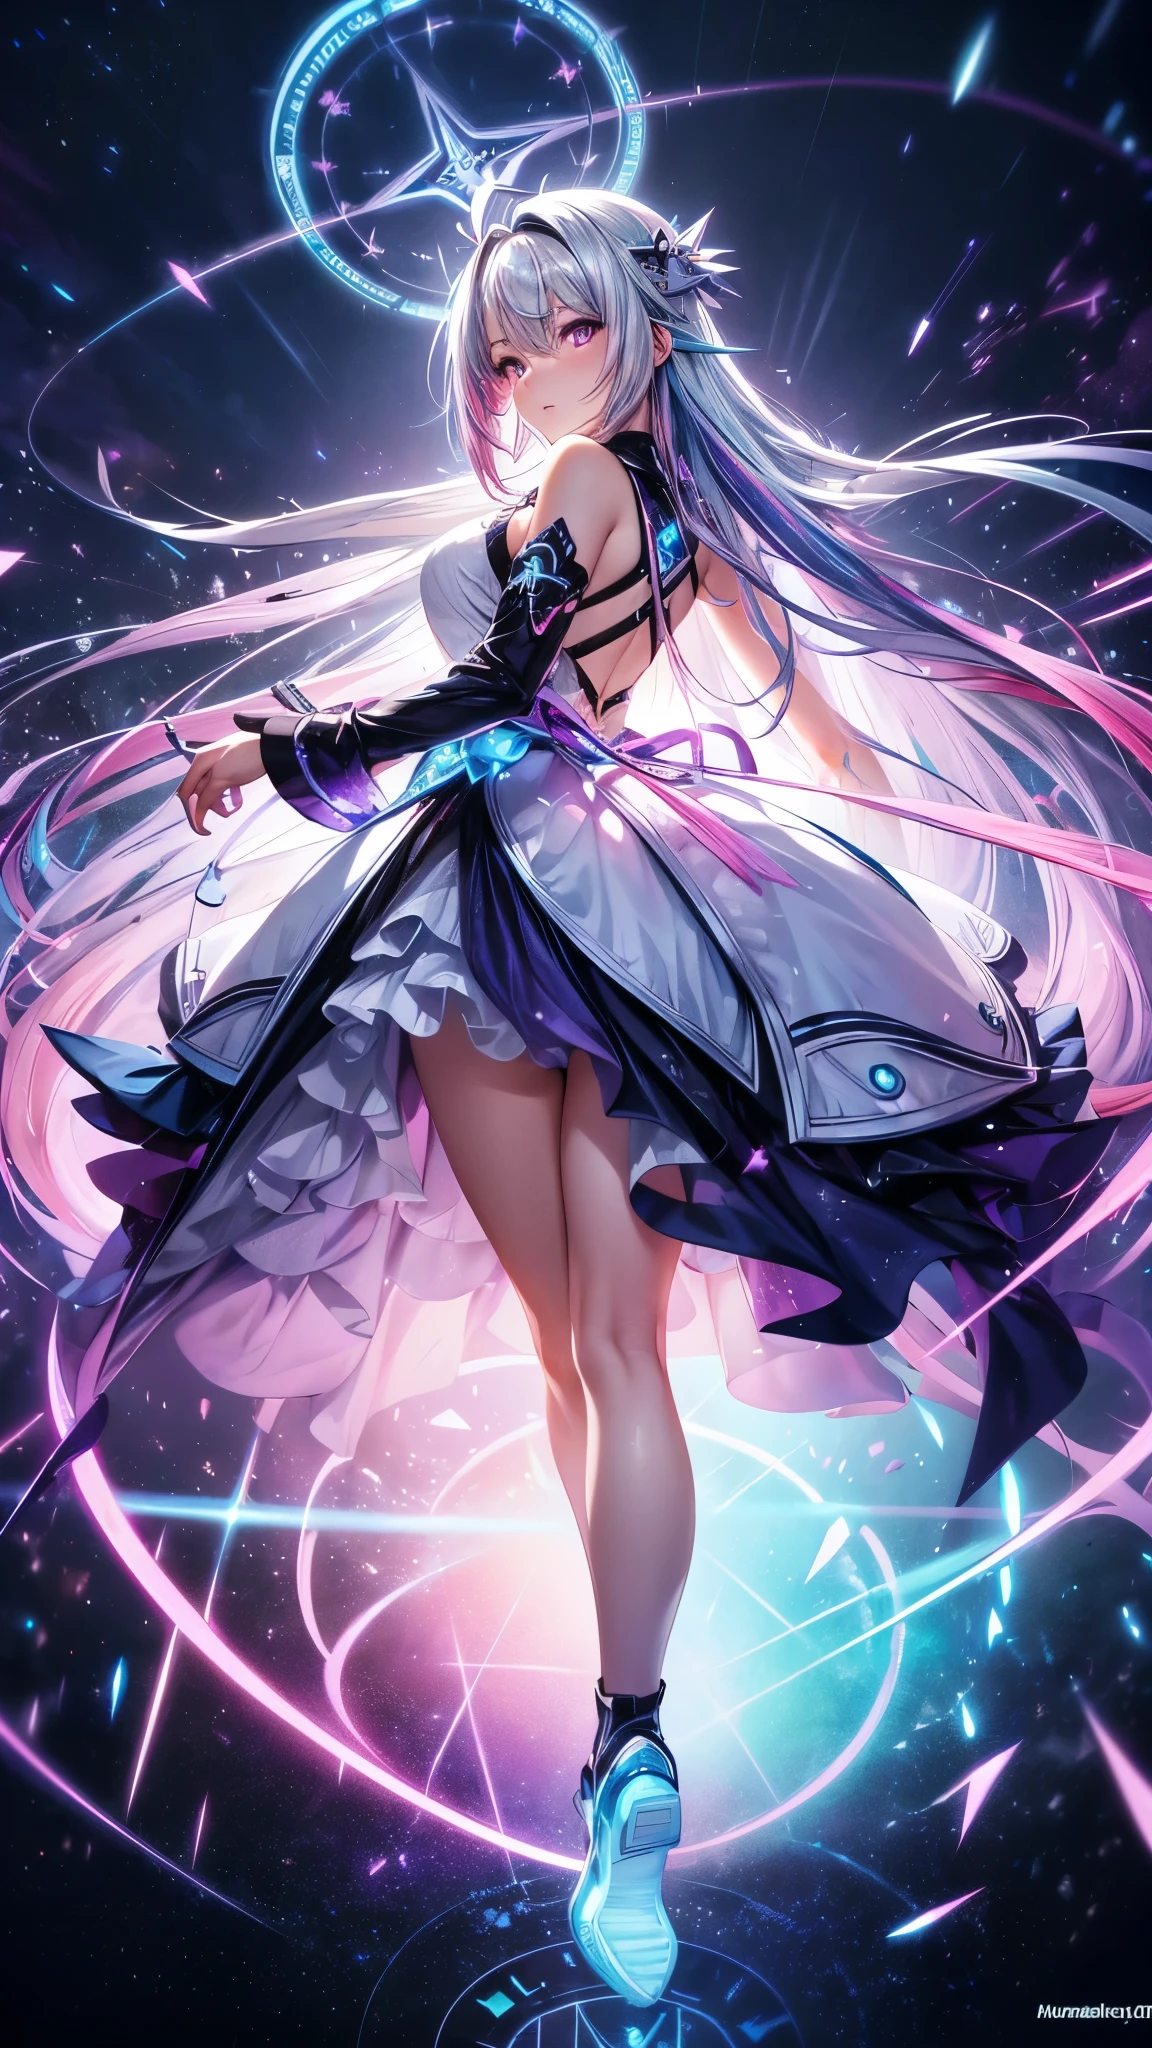 1 girl, one person, (Silver blue hair streaked pink purple:1.4), (Gradient sky blue hair ends:1.6), hair strand, absurdly long hair, single sidelock, wavy hair, shiny hair, floating hair, (Illusion deep purple eyes), delicate eyes, aqua eyes, High like real eyes, ((glowing eyes)), makeup, Focus on face, Very detailed facial, hot body, Random environment, Random pose, on the street, looking at the starry night sky, meteor, Technical clothing masterpiece, White extra long skirt, universe, several cross stars beside, Colored lights swirl around the body, (((Extra super huge colorful extra super complex multiple glowing magic circle upright on the back of the head))), cyberpunk, full body shot, realism anime, chiaroscuro, (glowing light), sparkle, ray tracing, cinematic lighting, Futurism, motion blur, perfect transition, god rays, atmospheric perspective, best quality, UHD, super detail, masterpiece, highres, ccurate, retina, Octane Render